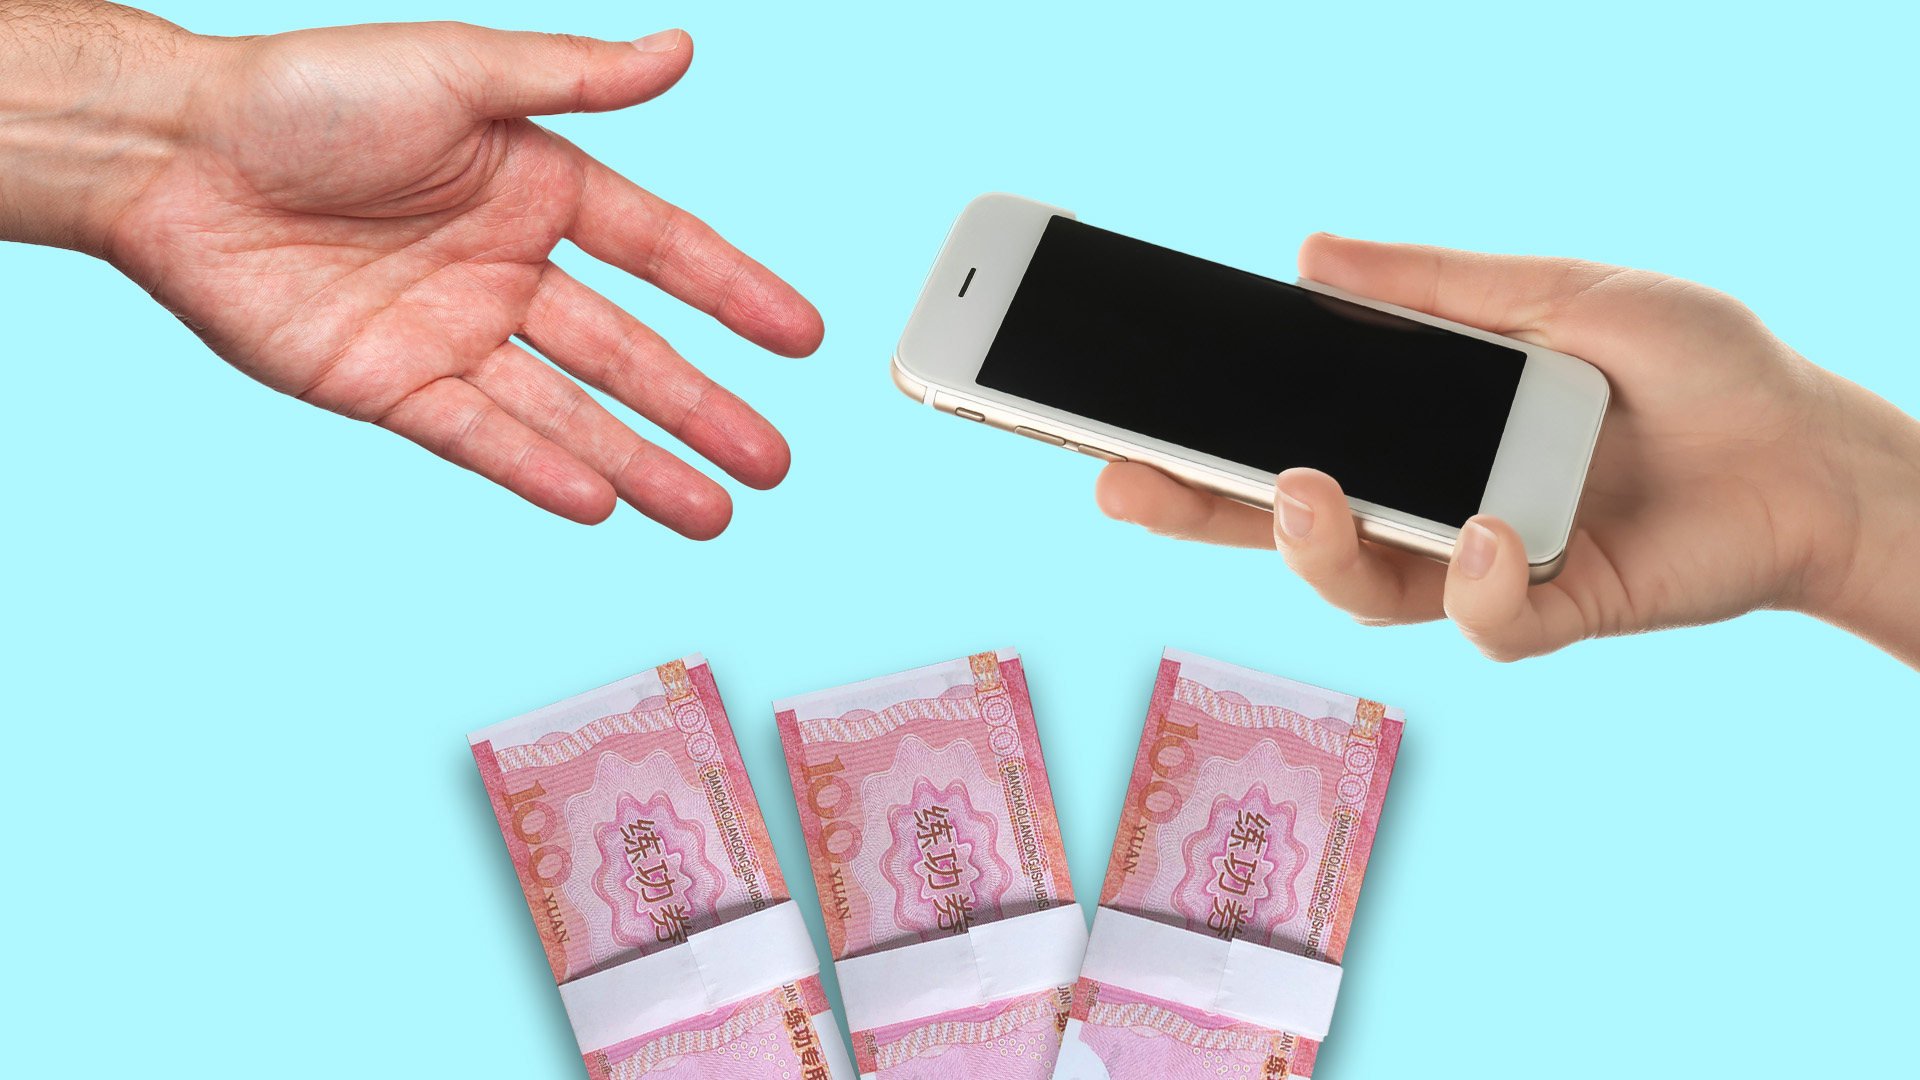 A woman in China who returned a lost mobile phone to its owner only to receive fake banknotes as a reward called in the police to investigate, claiming she was “insulted”. Photo: SCMP composite/Shutterstock/Taobao